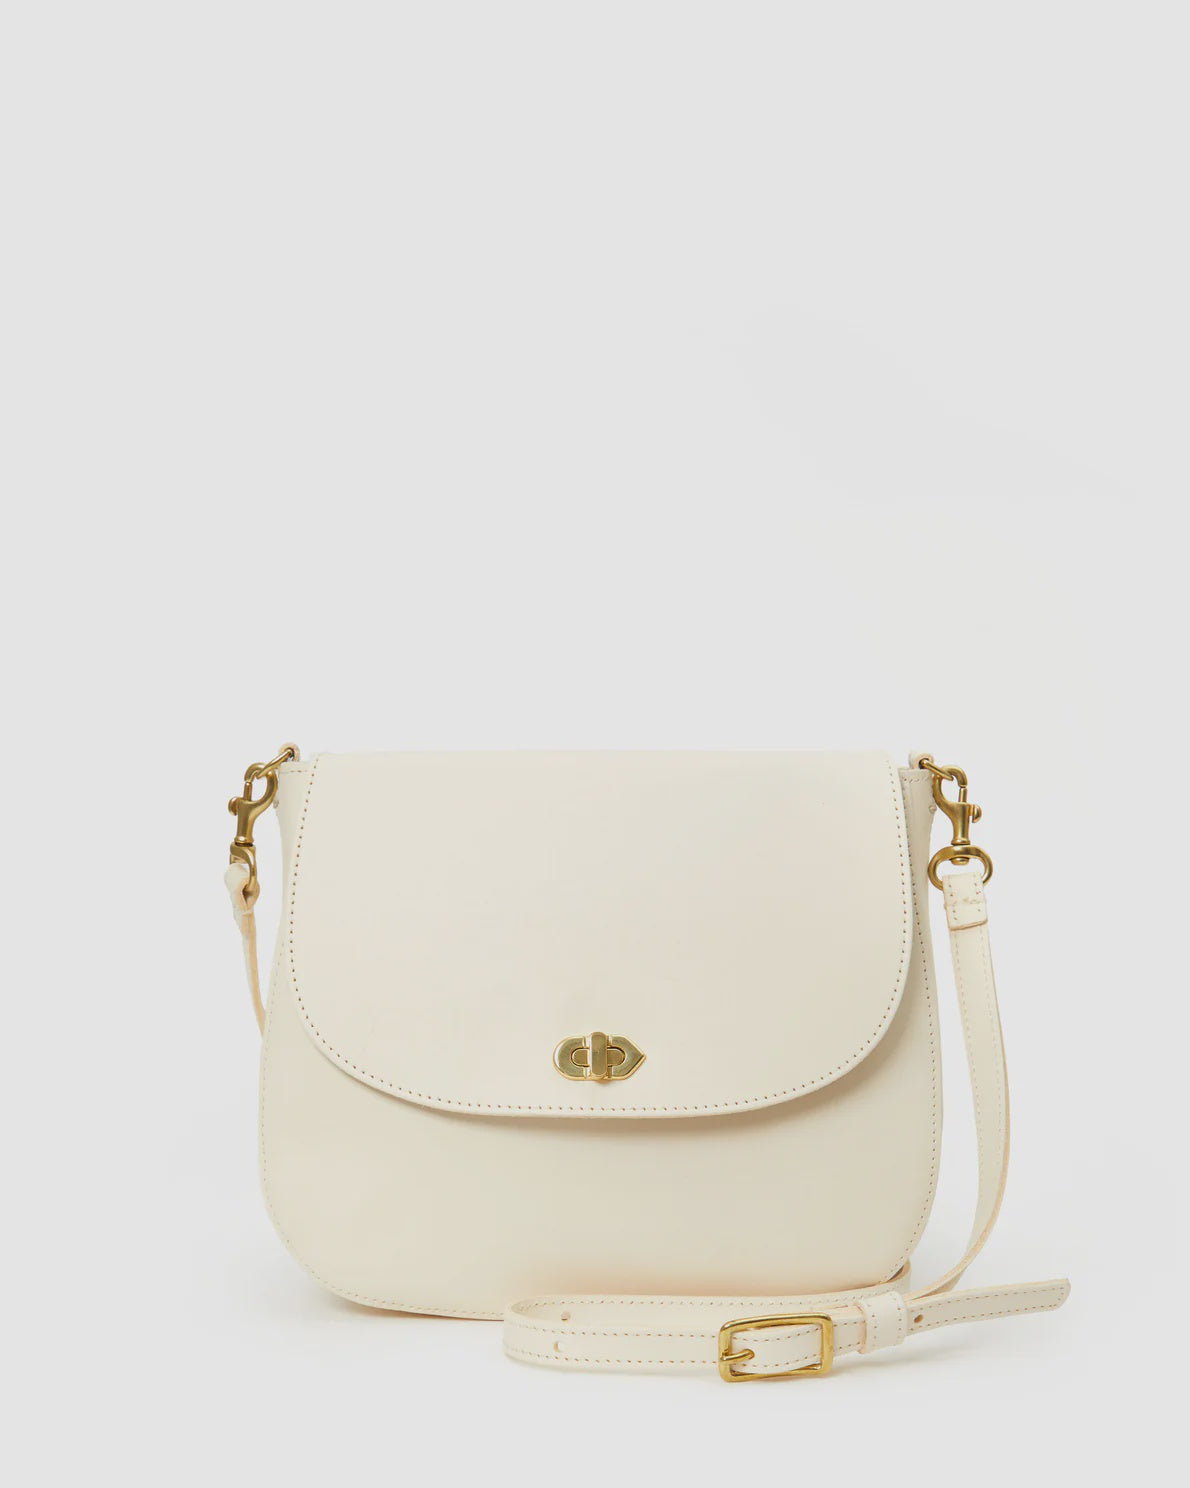 A Turnlock Louis Cream crossbody purse by Clare Vivier with a flap closure and a gold clasp, displayed against a solid white background. The purse has an adjustable strap with a buckle and includes a convenient back pocket.